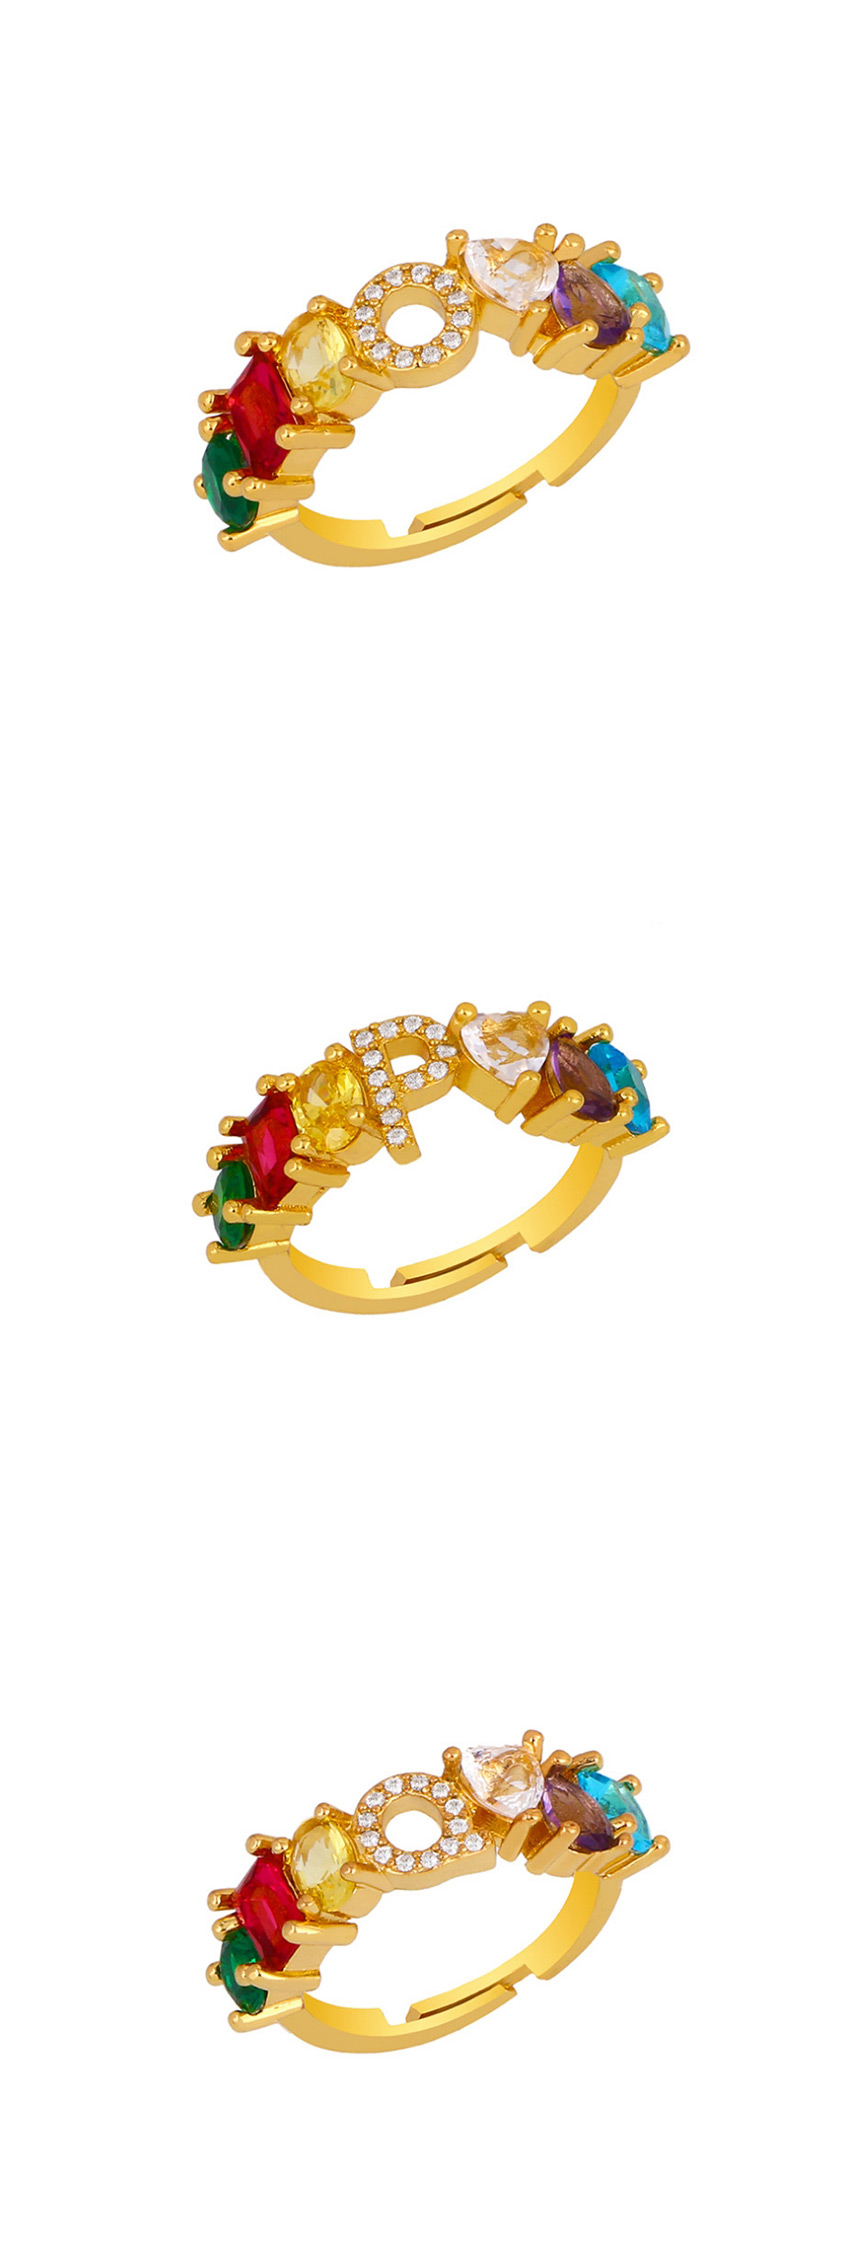 Fashion N Gold Heart-shaped Adjustable Ring With Colorful Diamond Letters,Rings